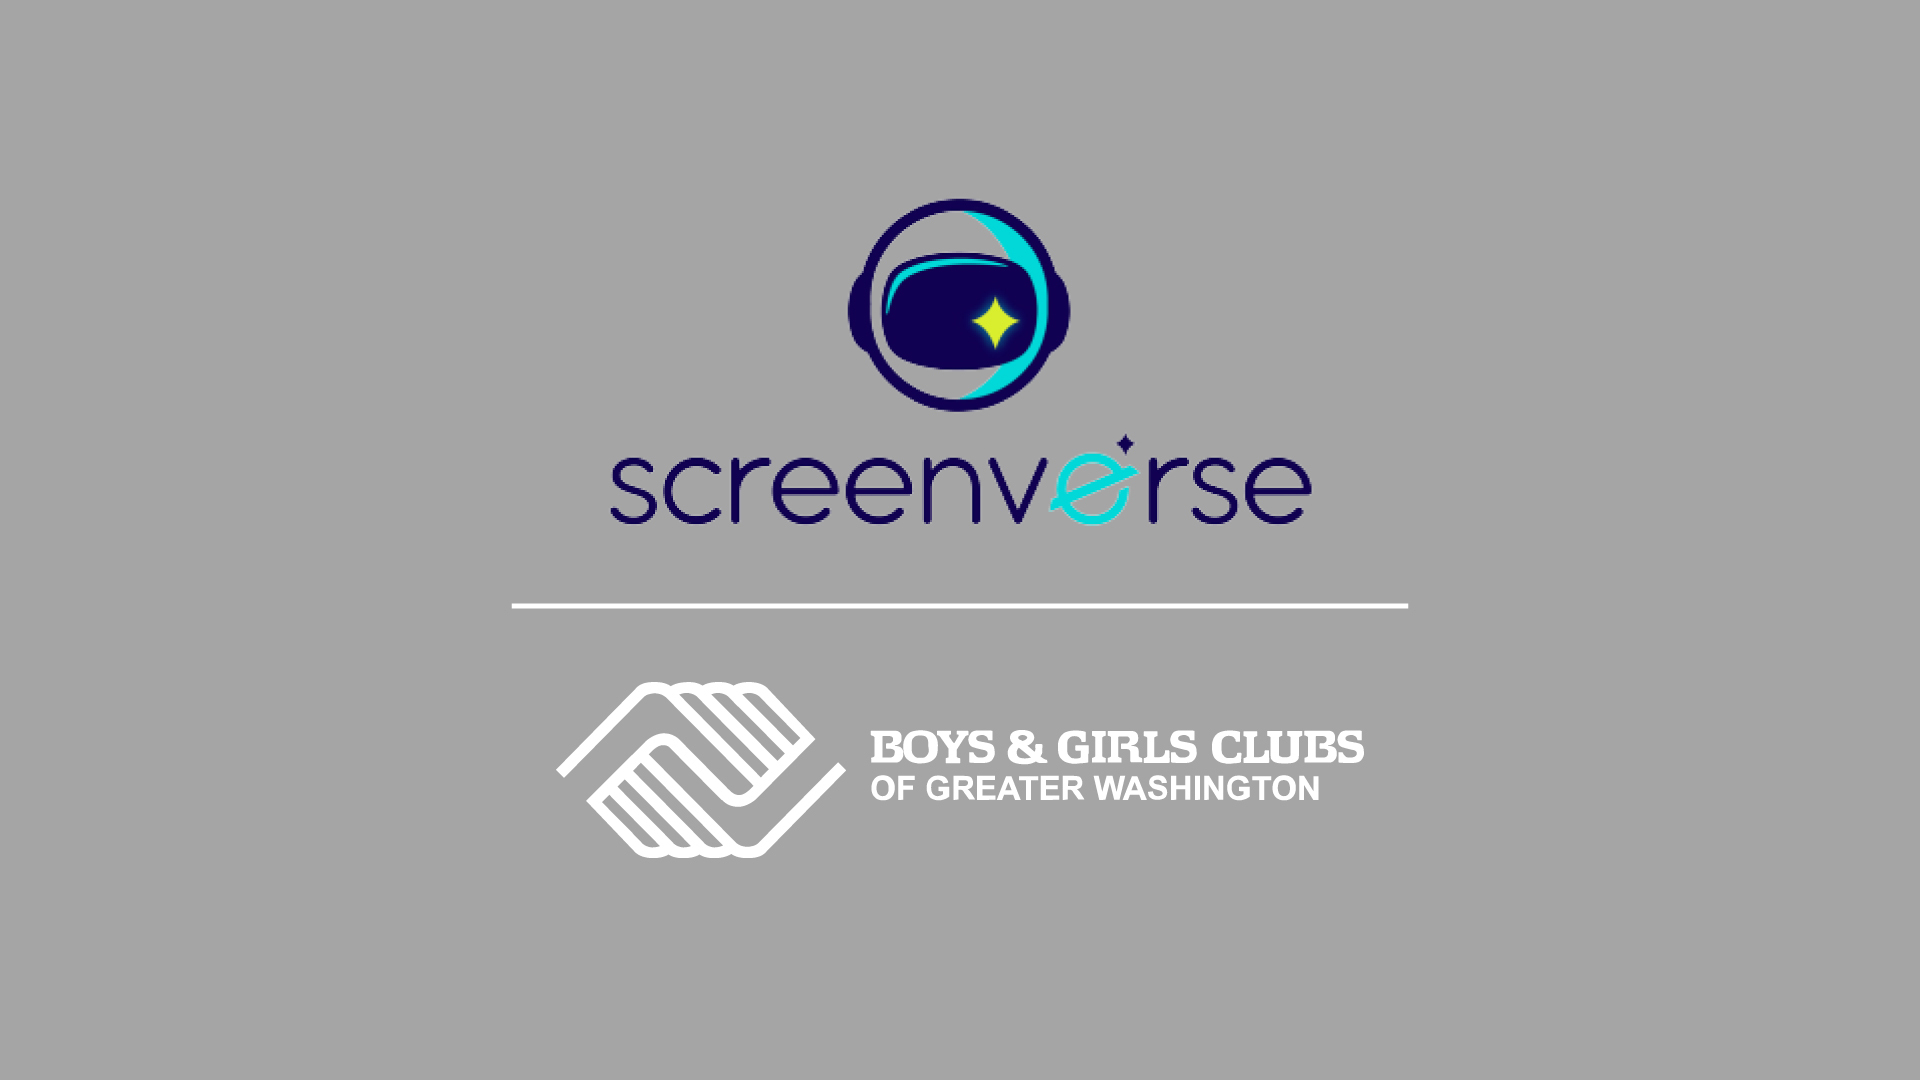 Screenverse Partners with Boys and Girls Clubs of Greater Washington to Drive Community Impact